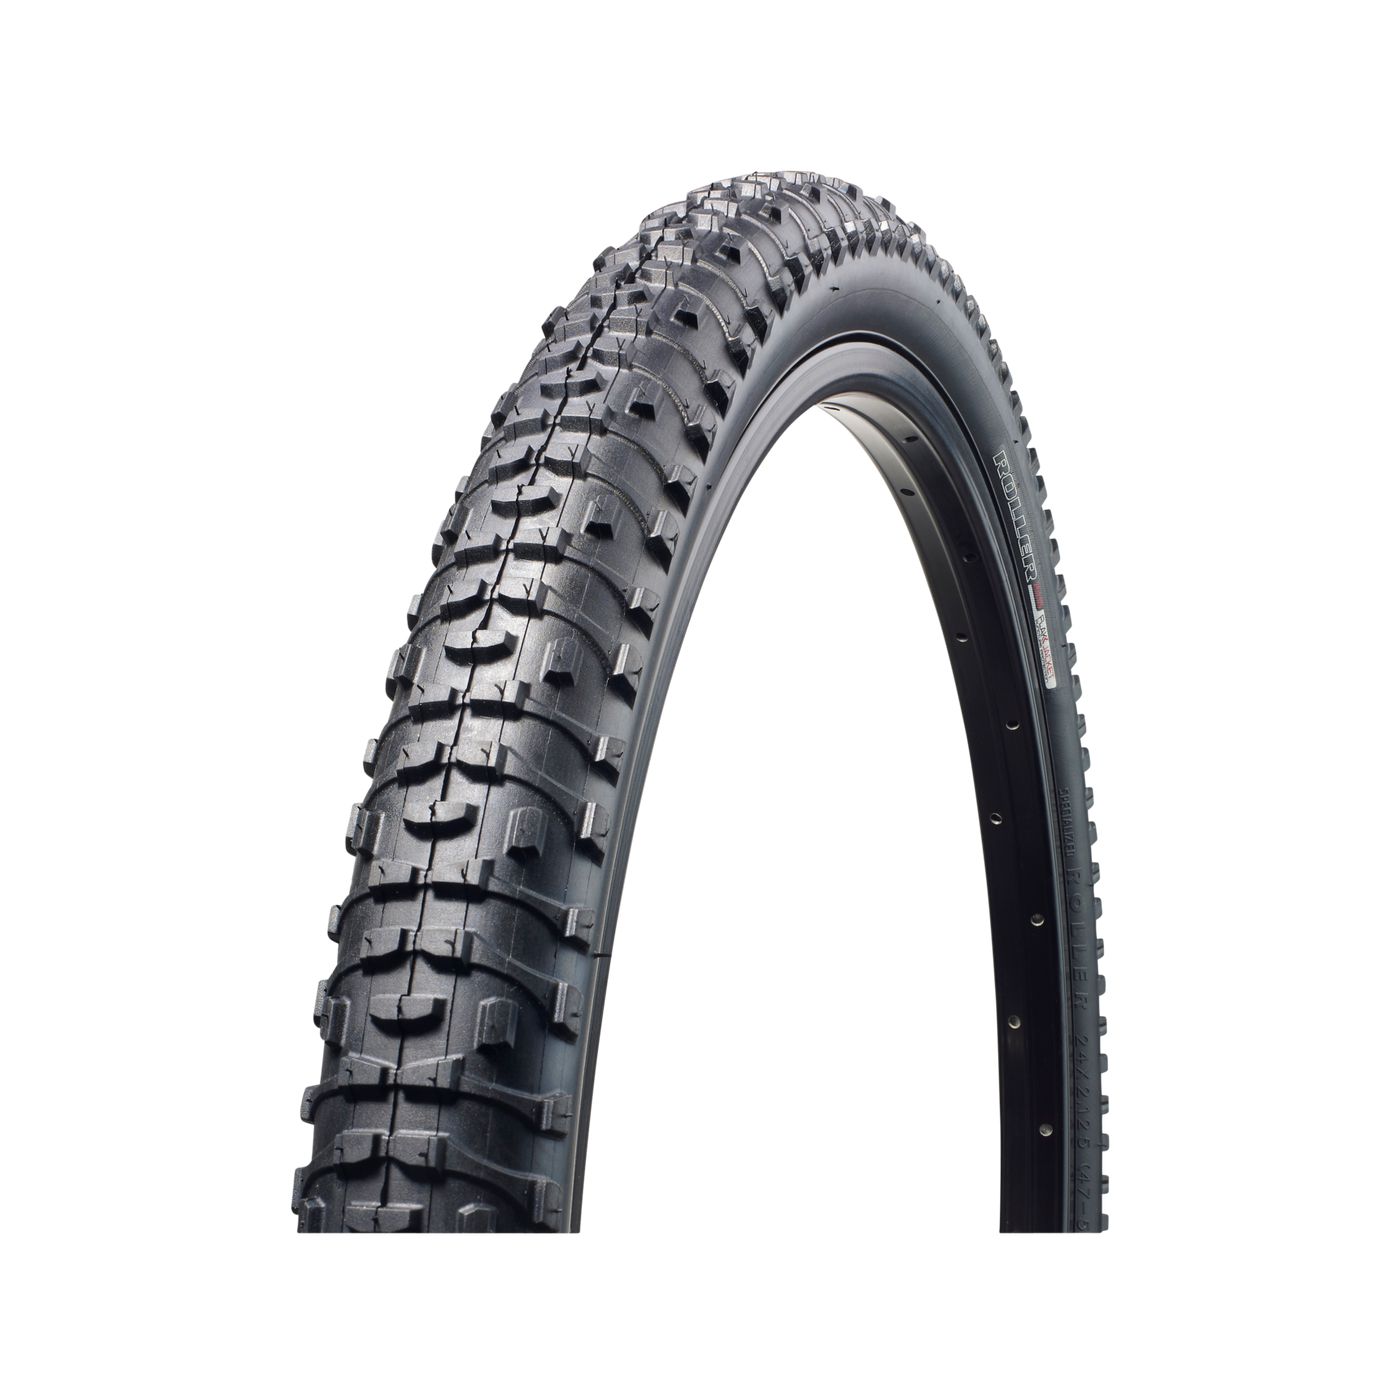 Specialized Roller 24" Bike Tire - Tires - Bicycle Warehouse